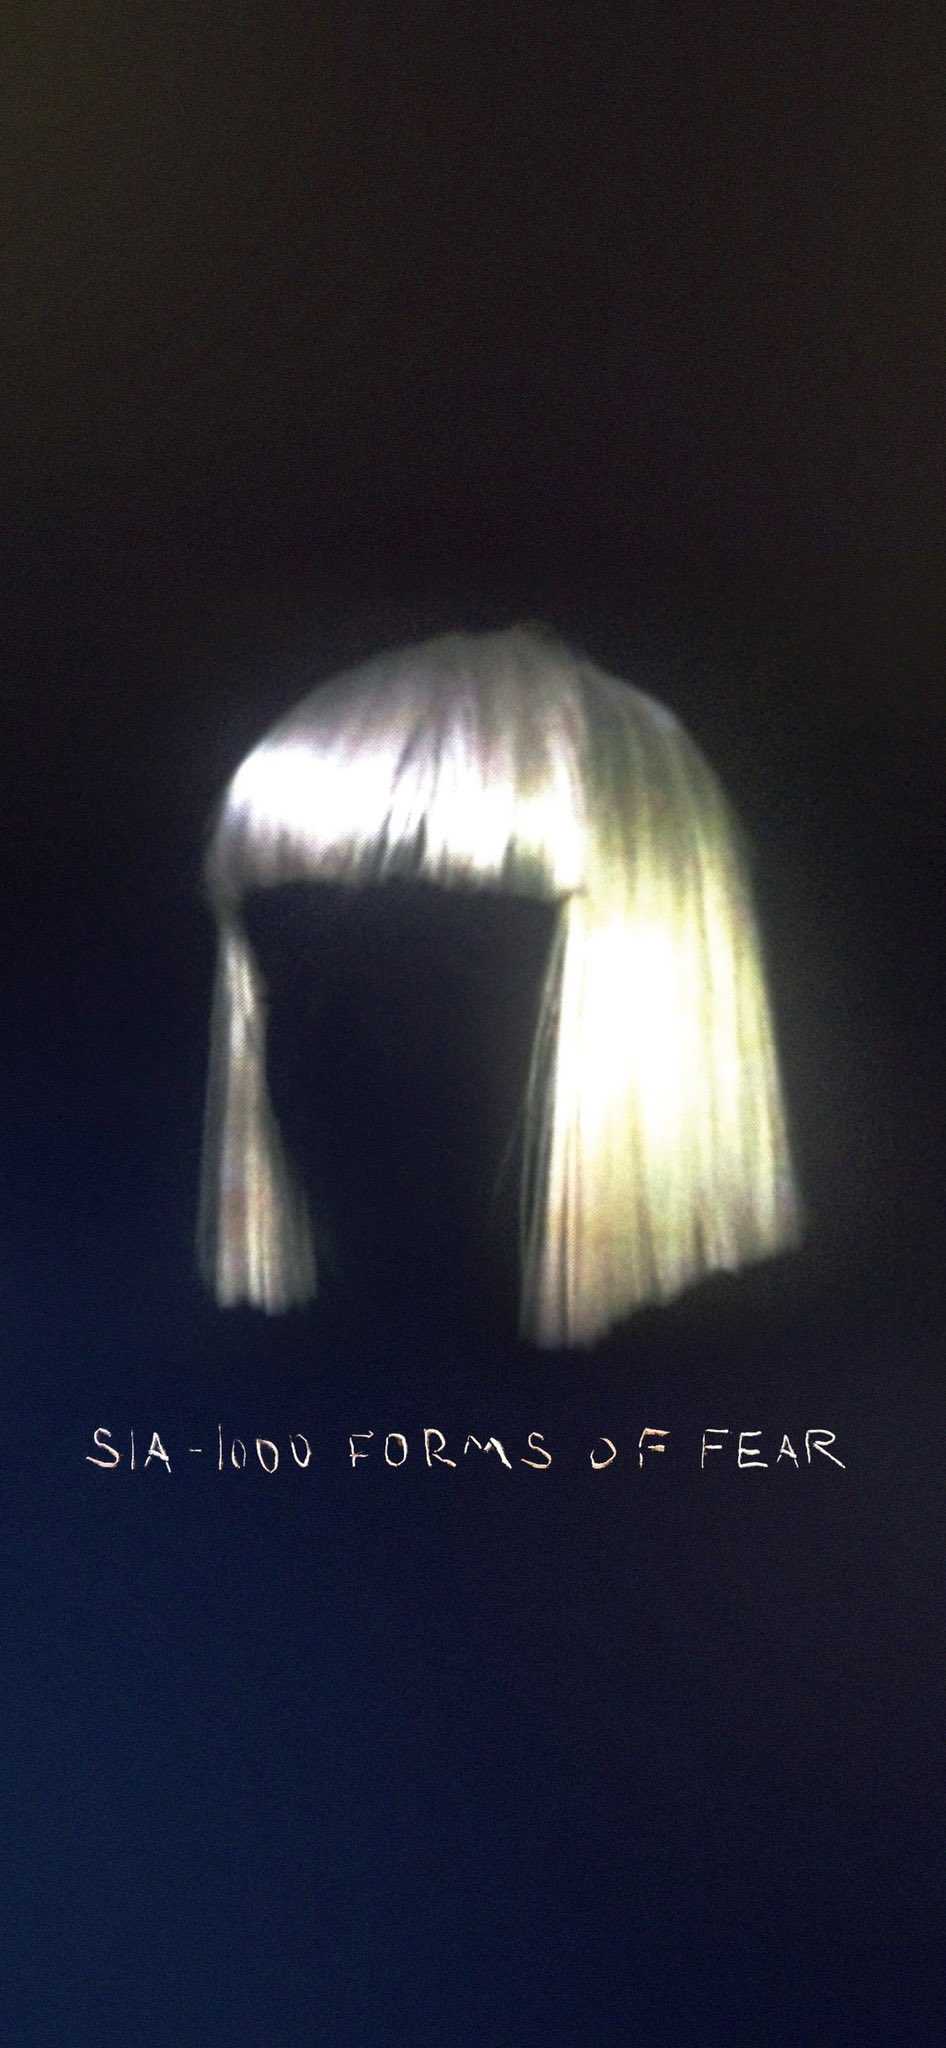 About Sia Furler